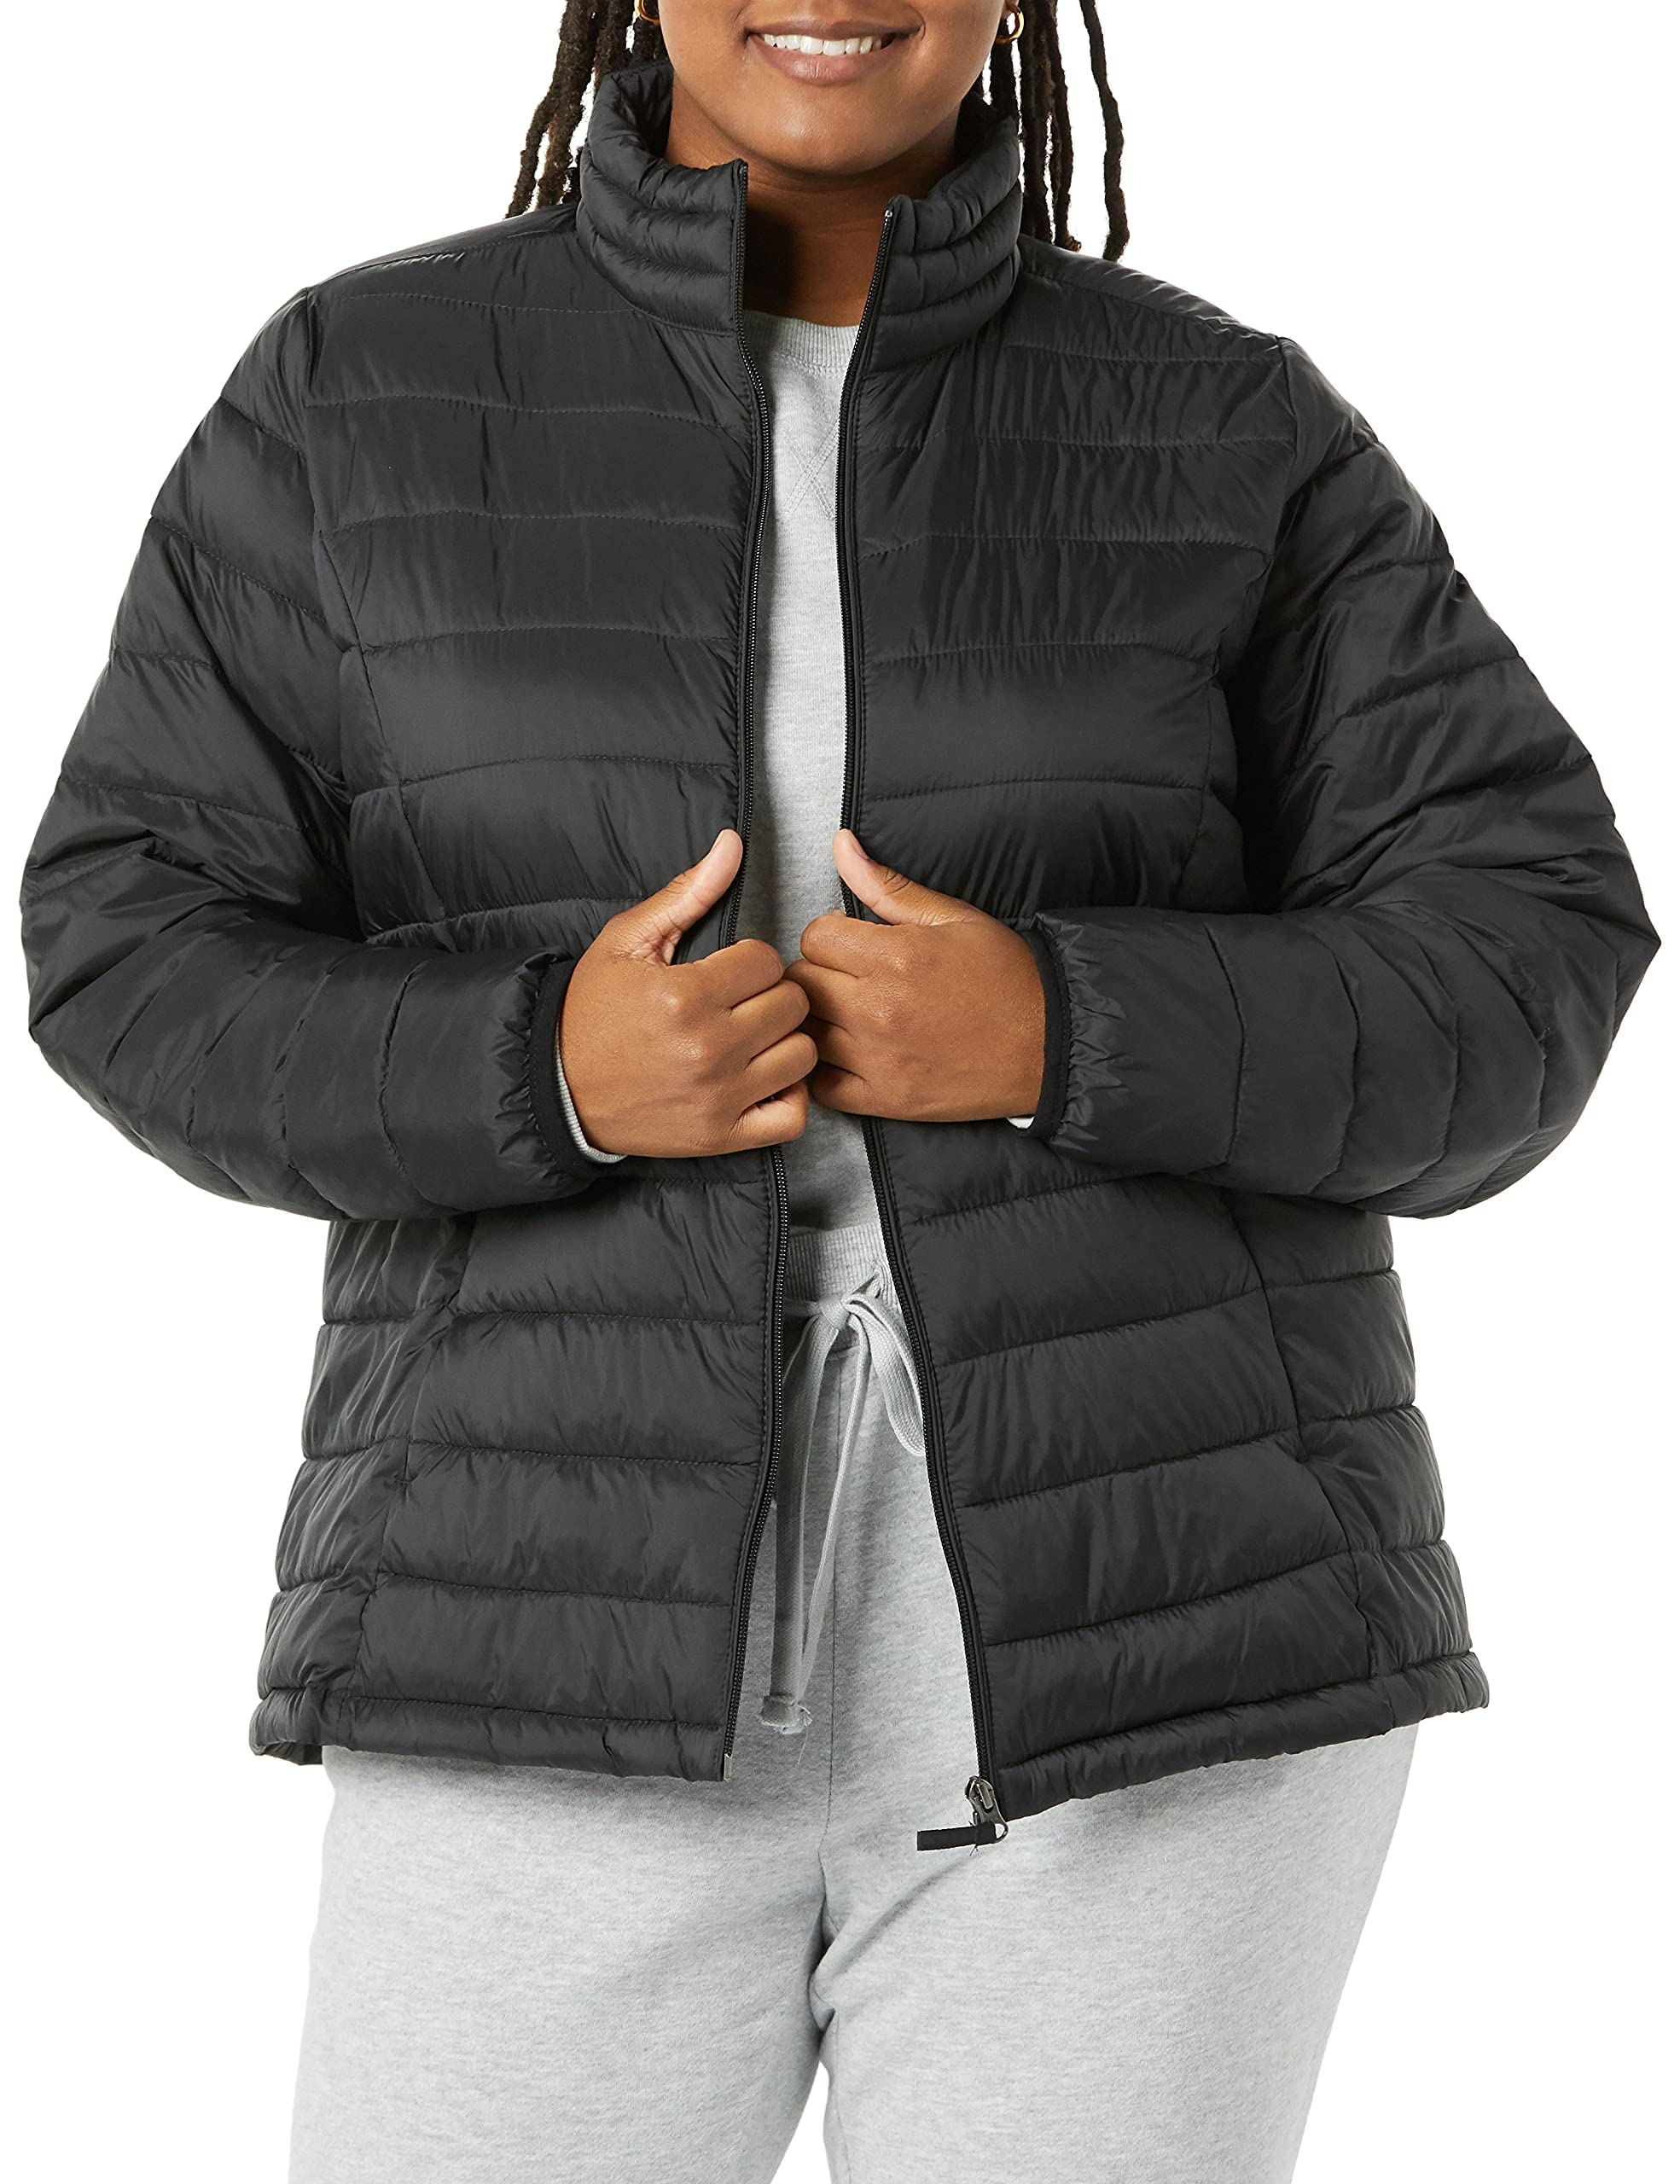 Amazon Essentials Women's Lightweight Long-Sleeve Water-Resistant Puffer Jacket (Available in Plus Size)